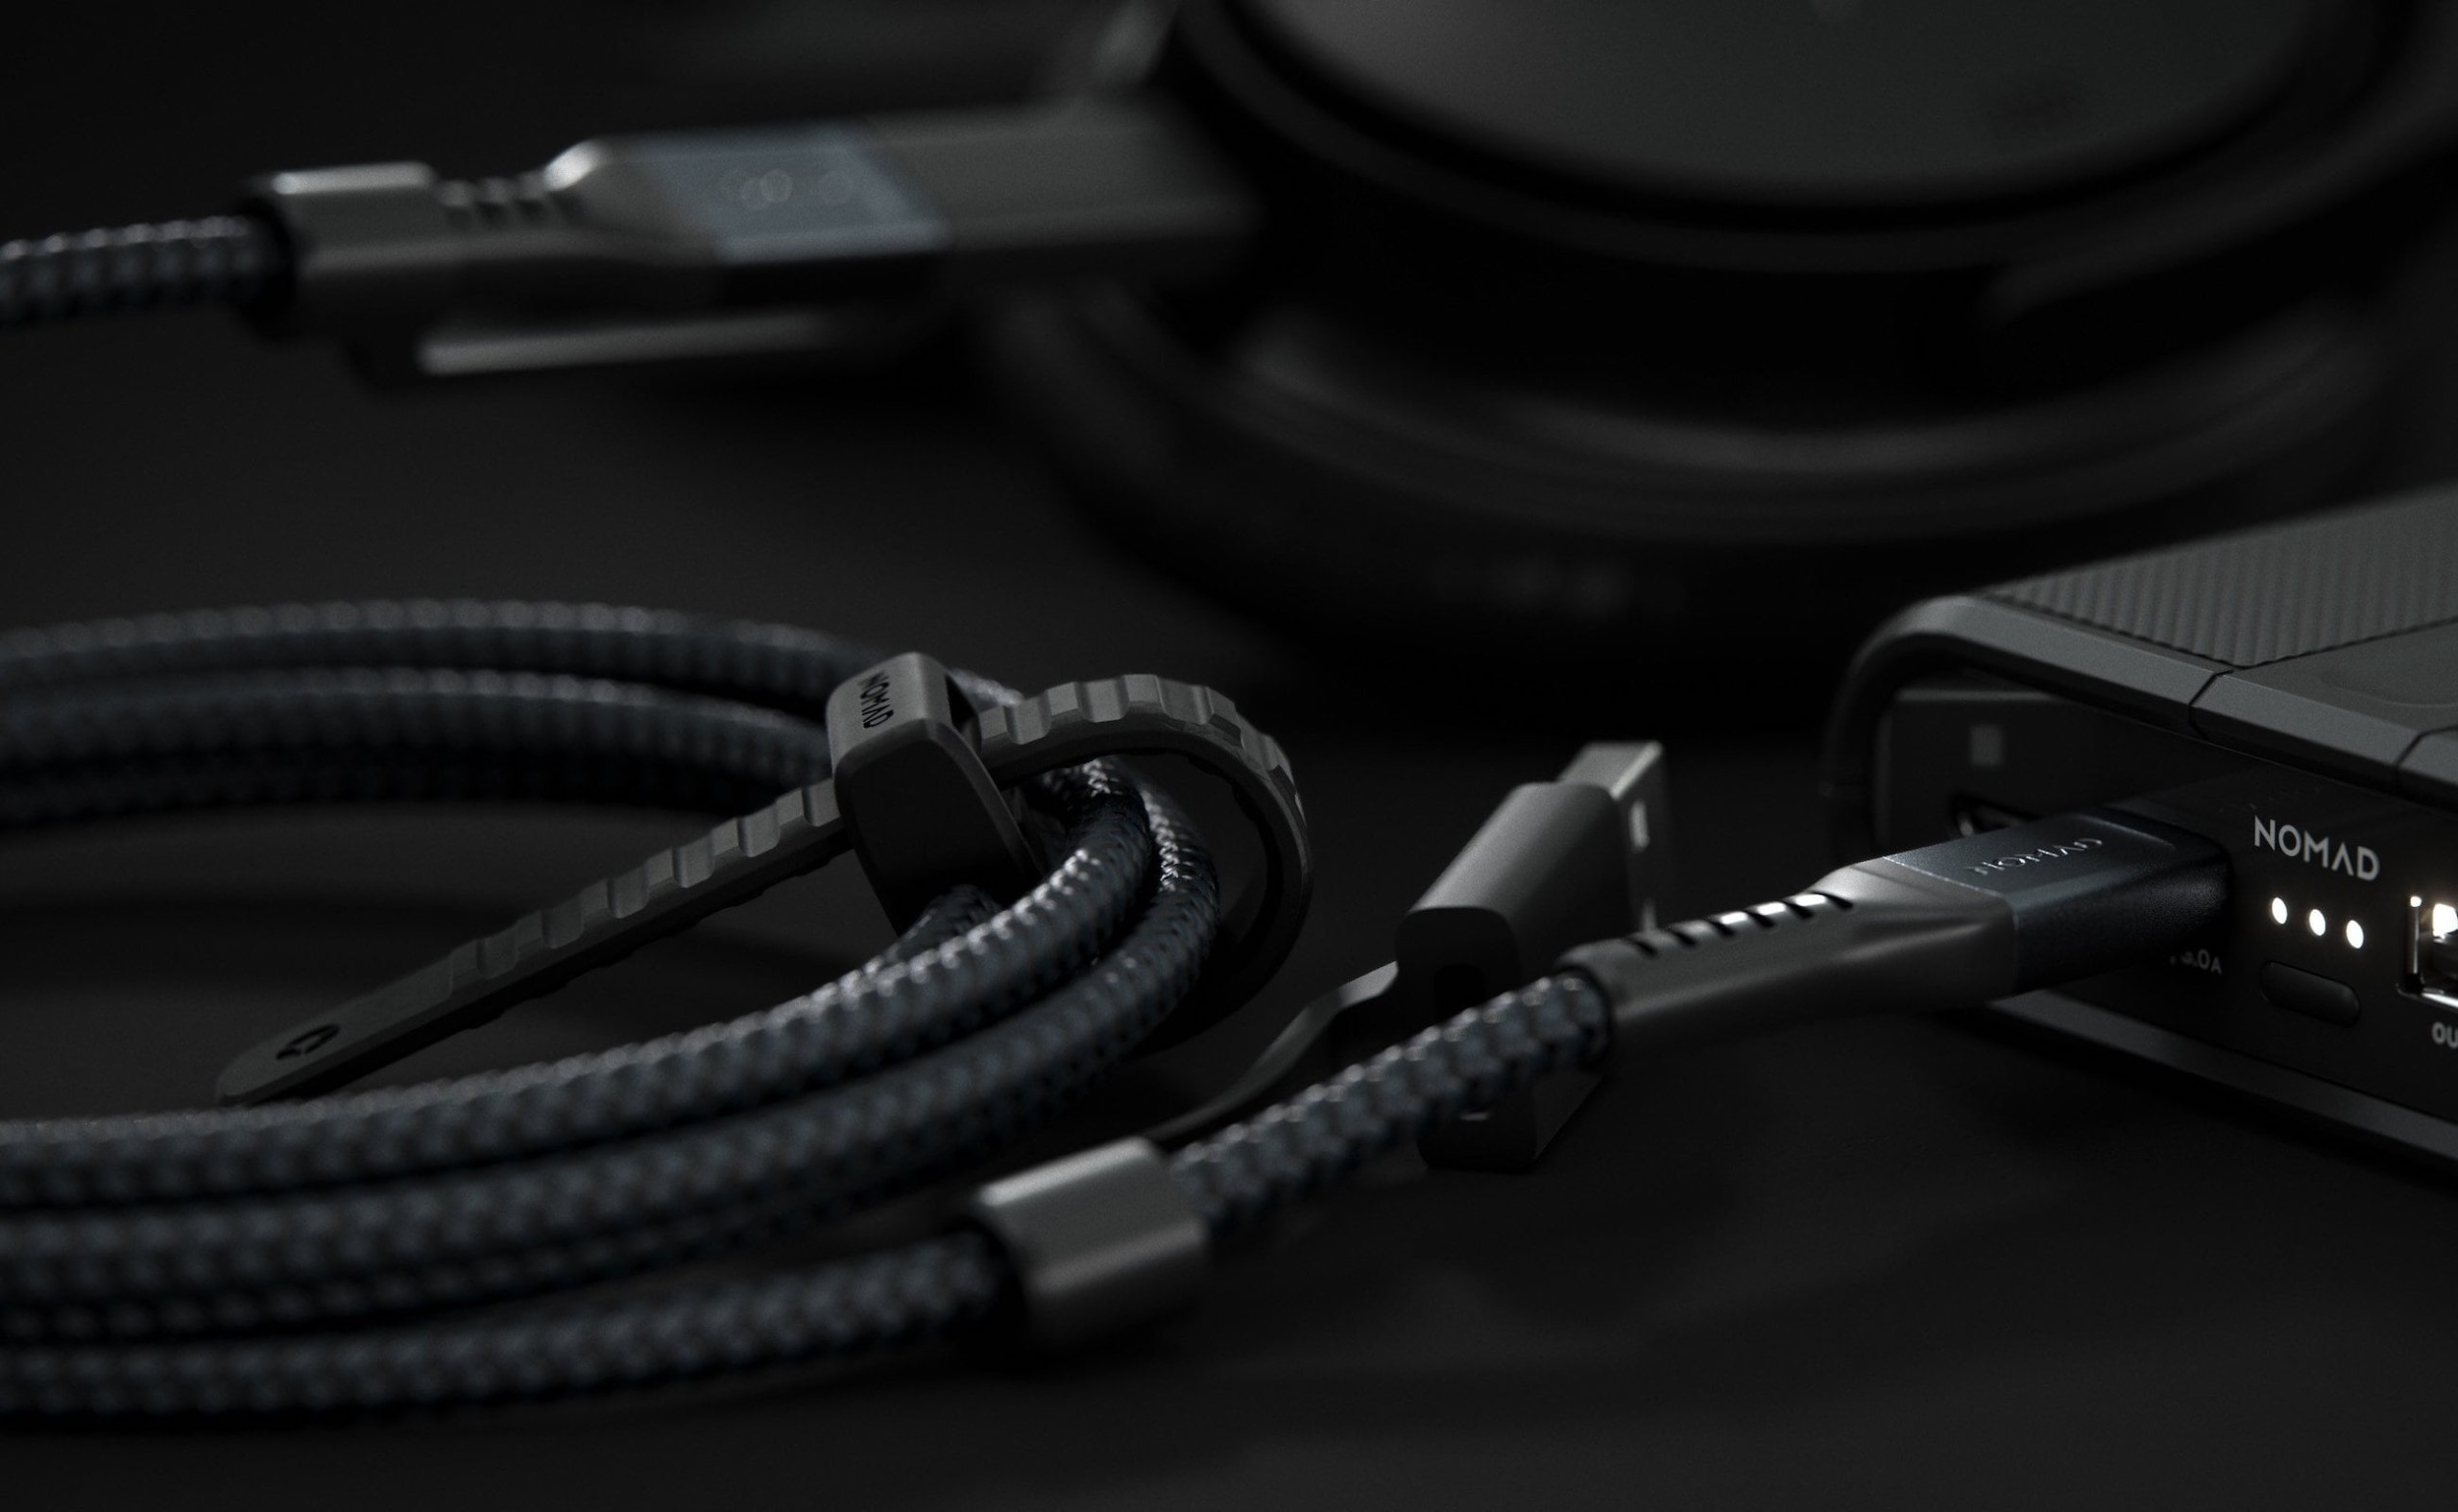 Nomad USB-C Universal Cable Versatile Kevlar Cord charges all your USB devices